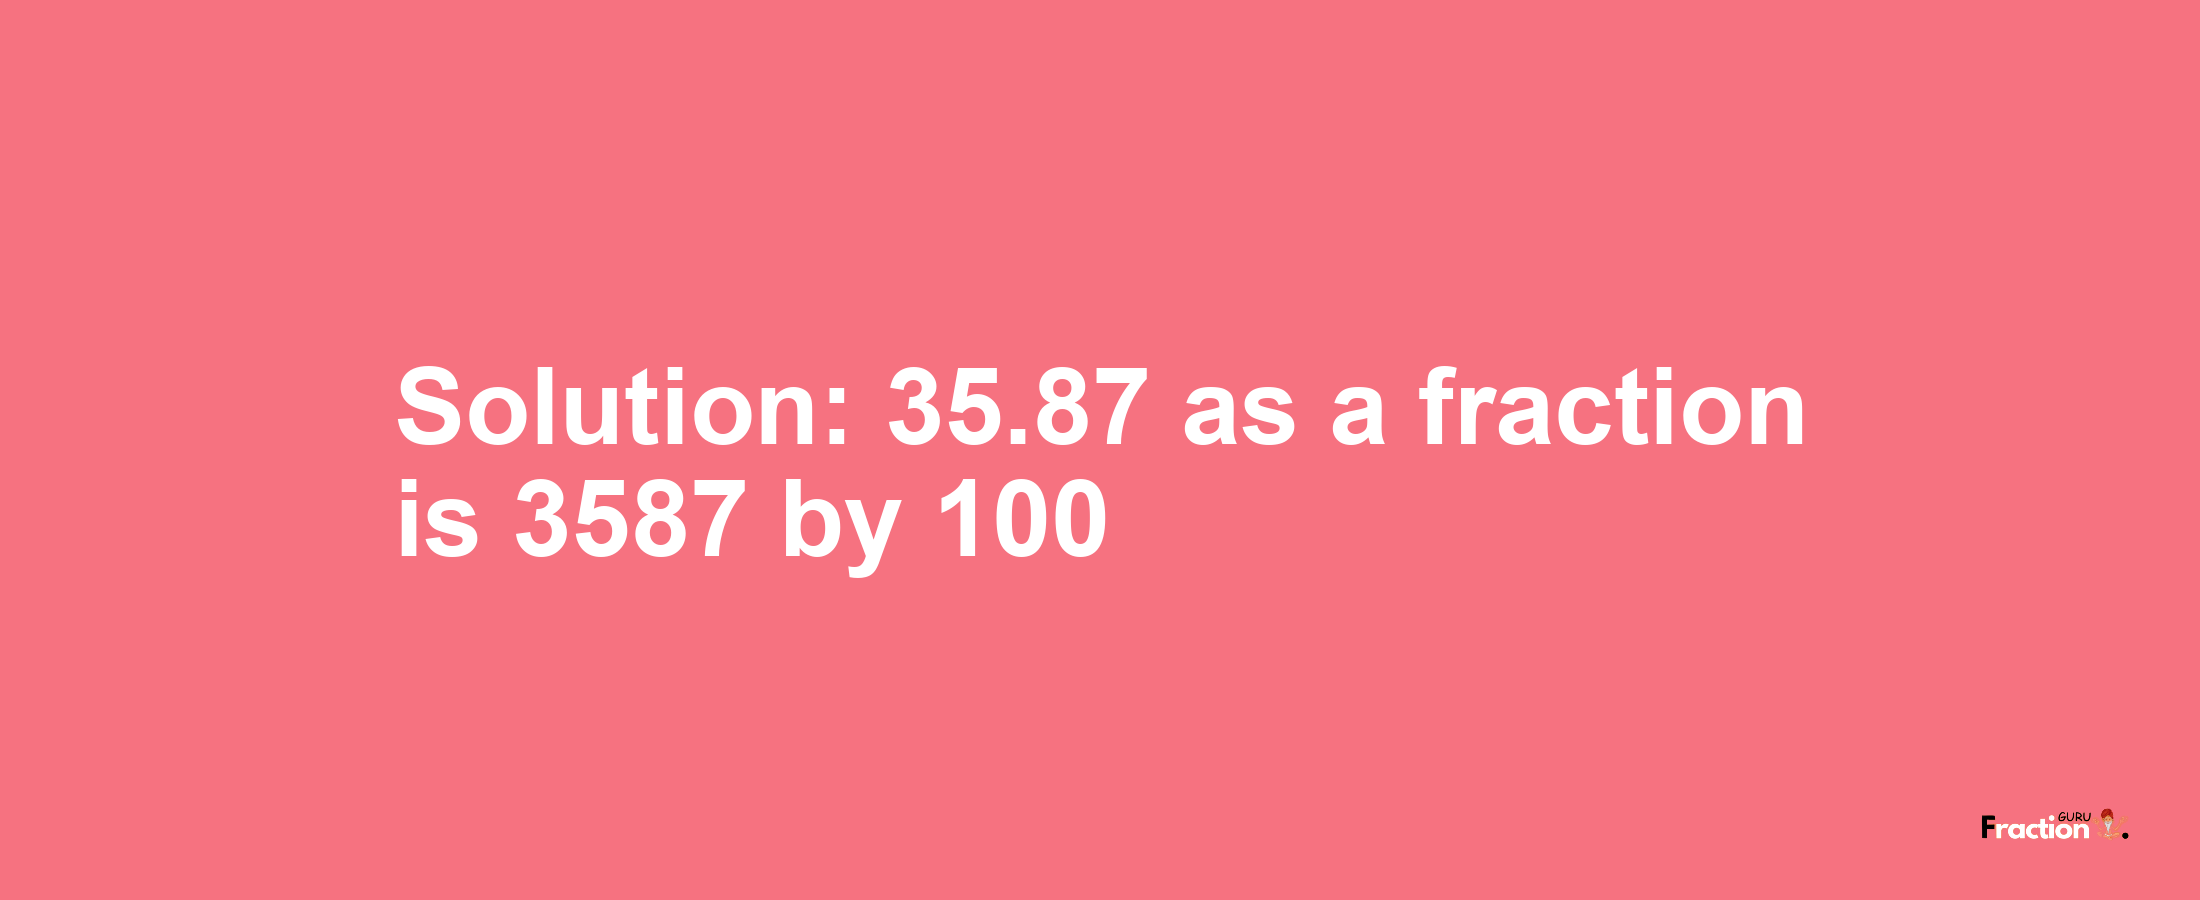 Solution:35.87 as a fraction is 3587/100